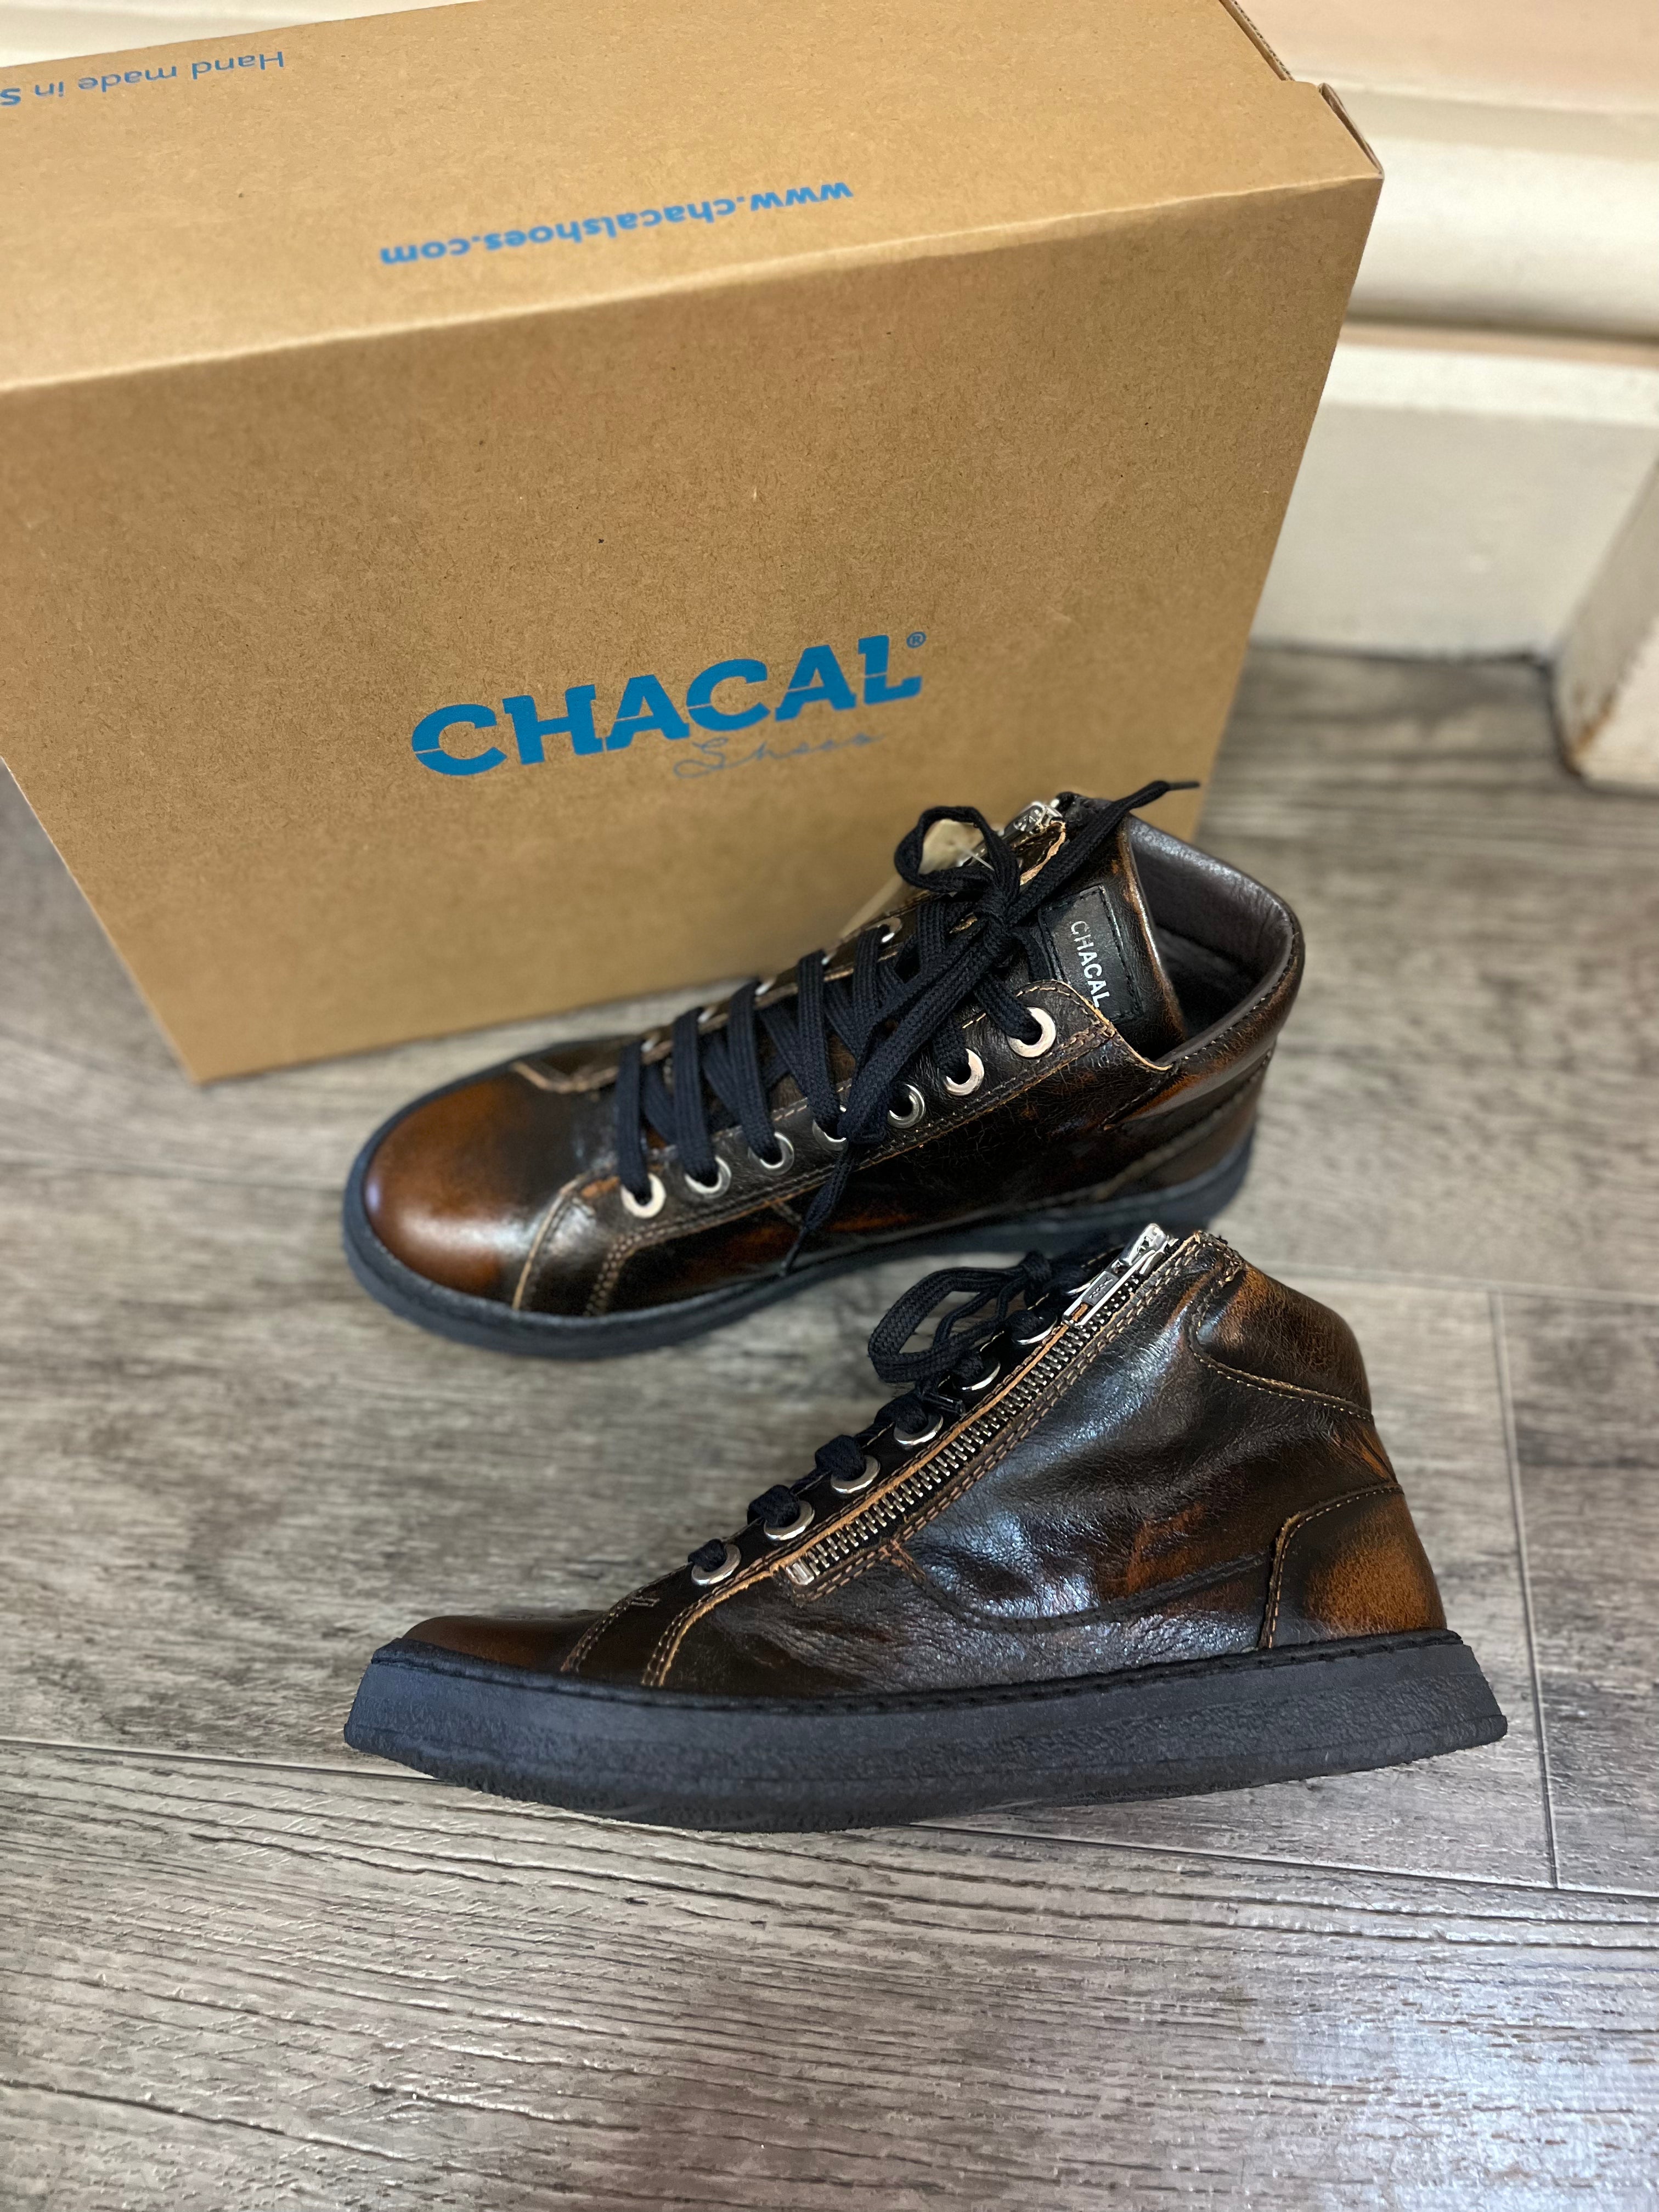 Chacal 5706-N Century Ocre Brown High Top Lace Up Shoes